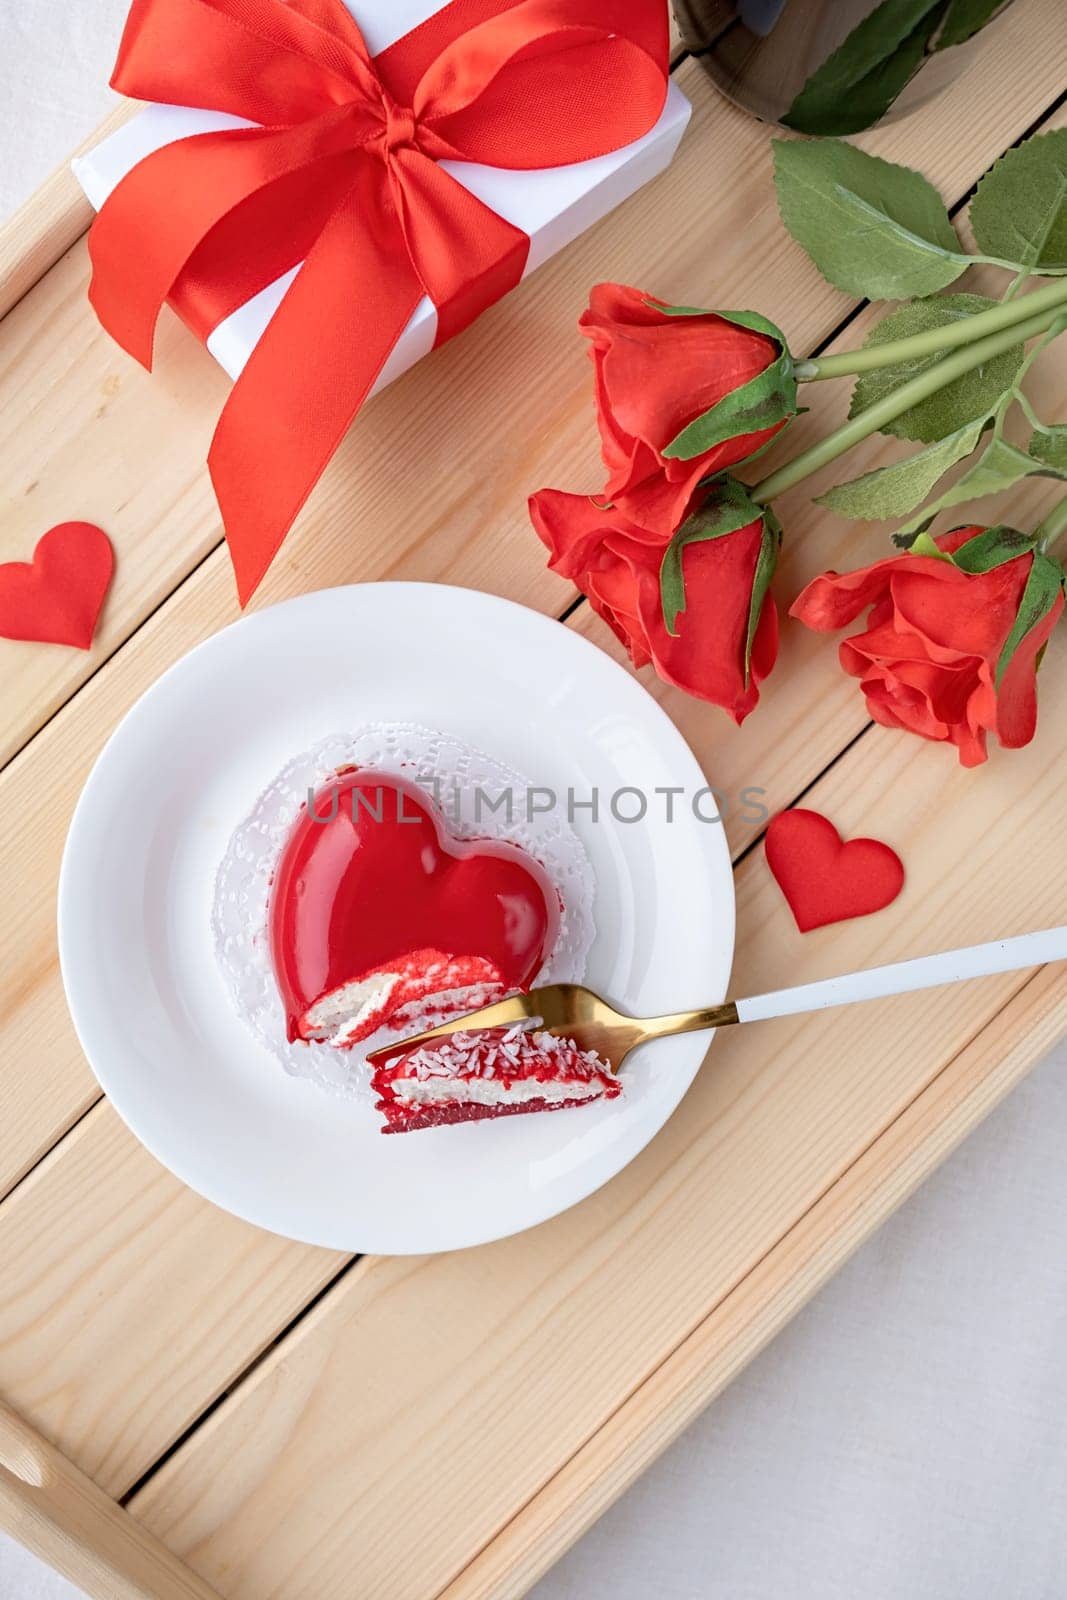 heart shaped glazed valentine cake and flowers on wooden tray by Desperada